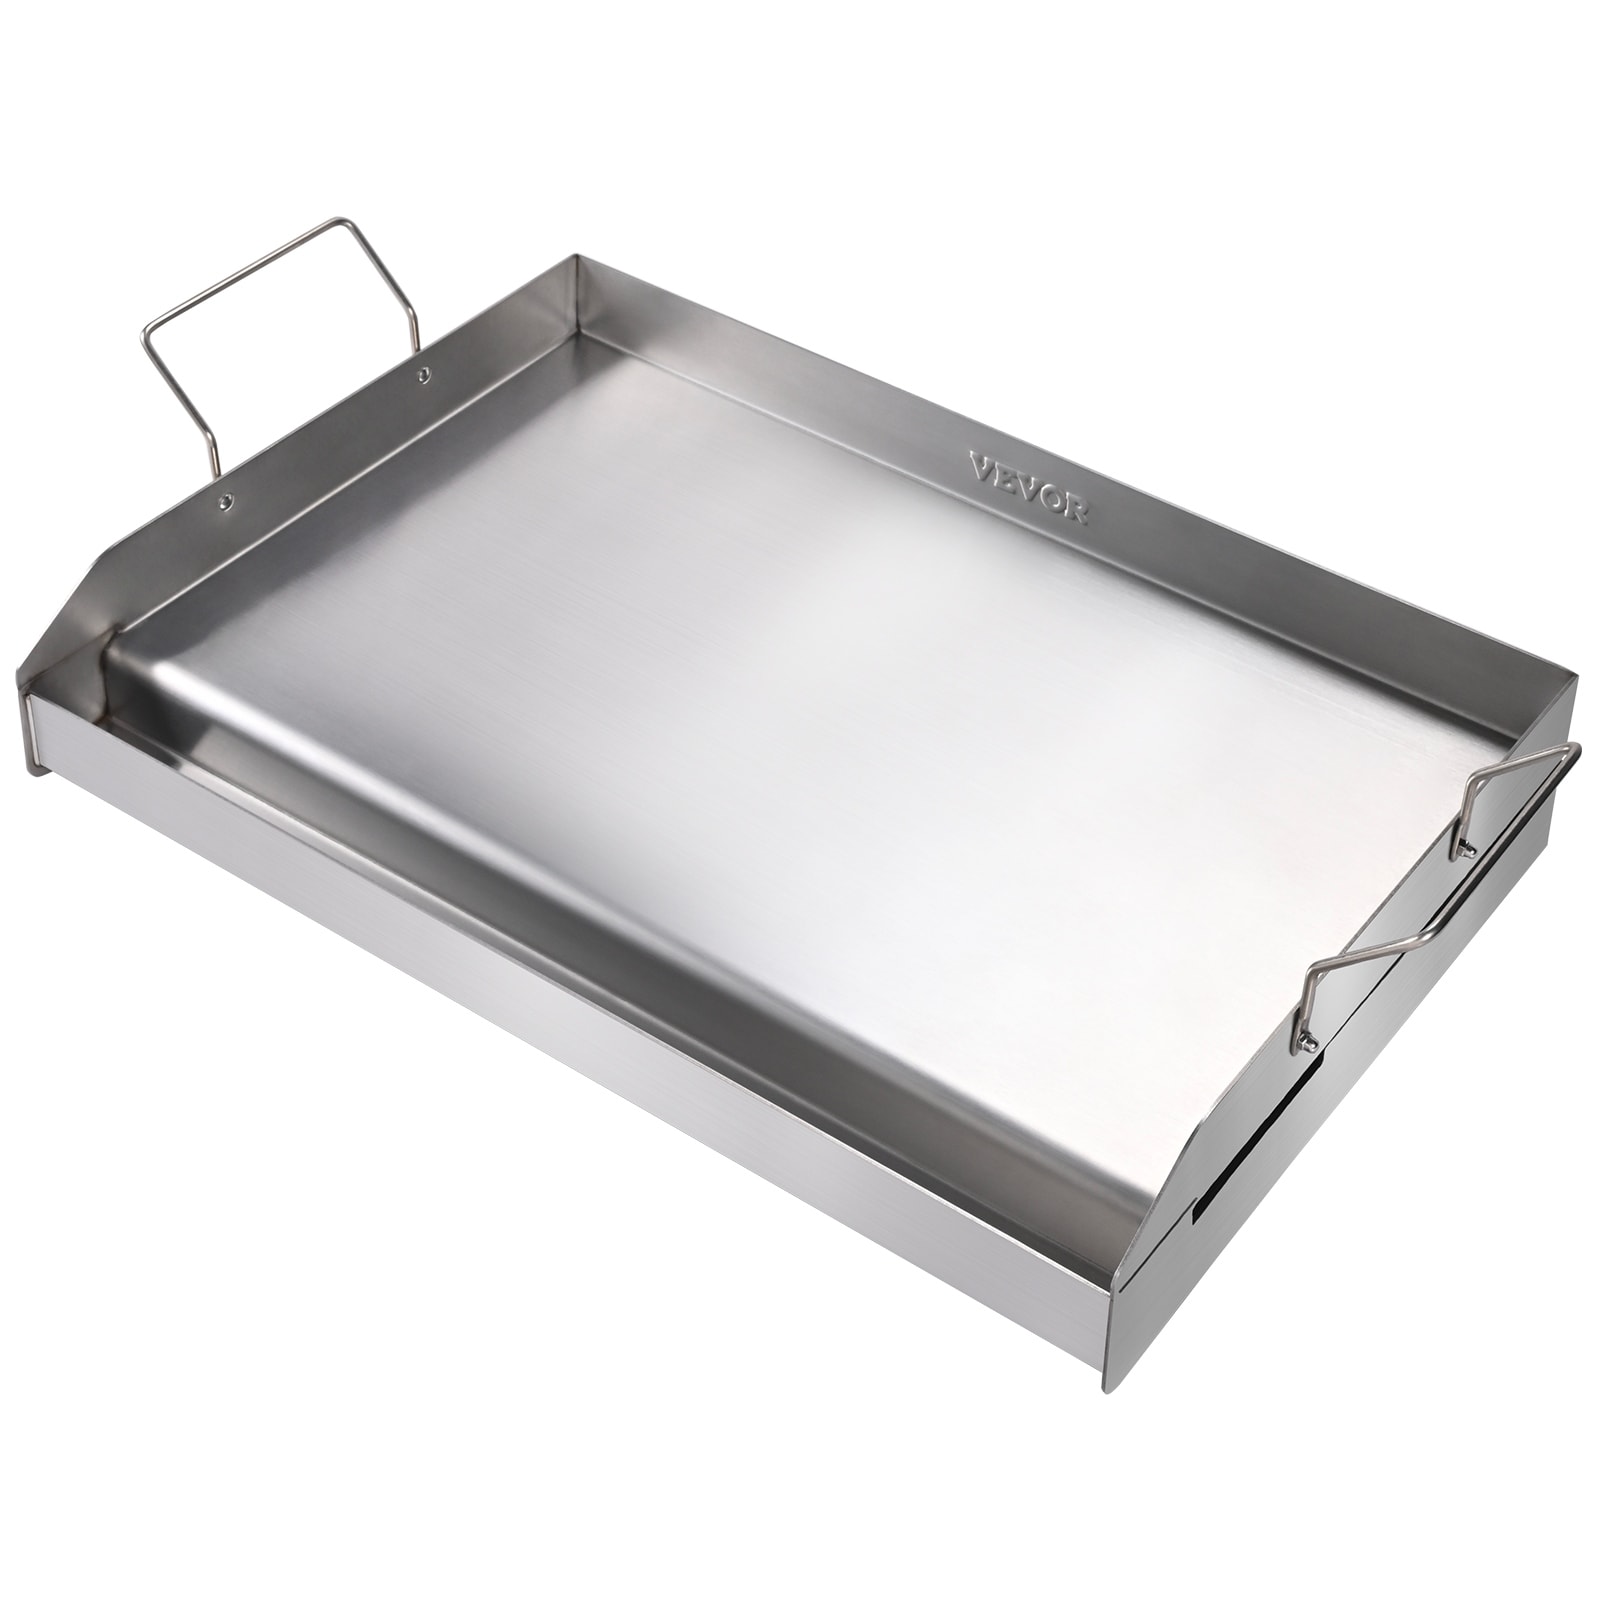 Stainless Steel Flat Comal Griddle Pan Cookware 16 inch